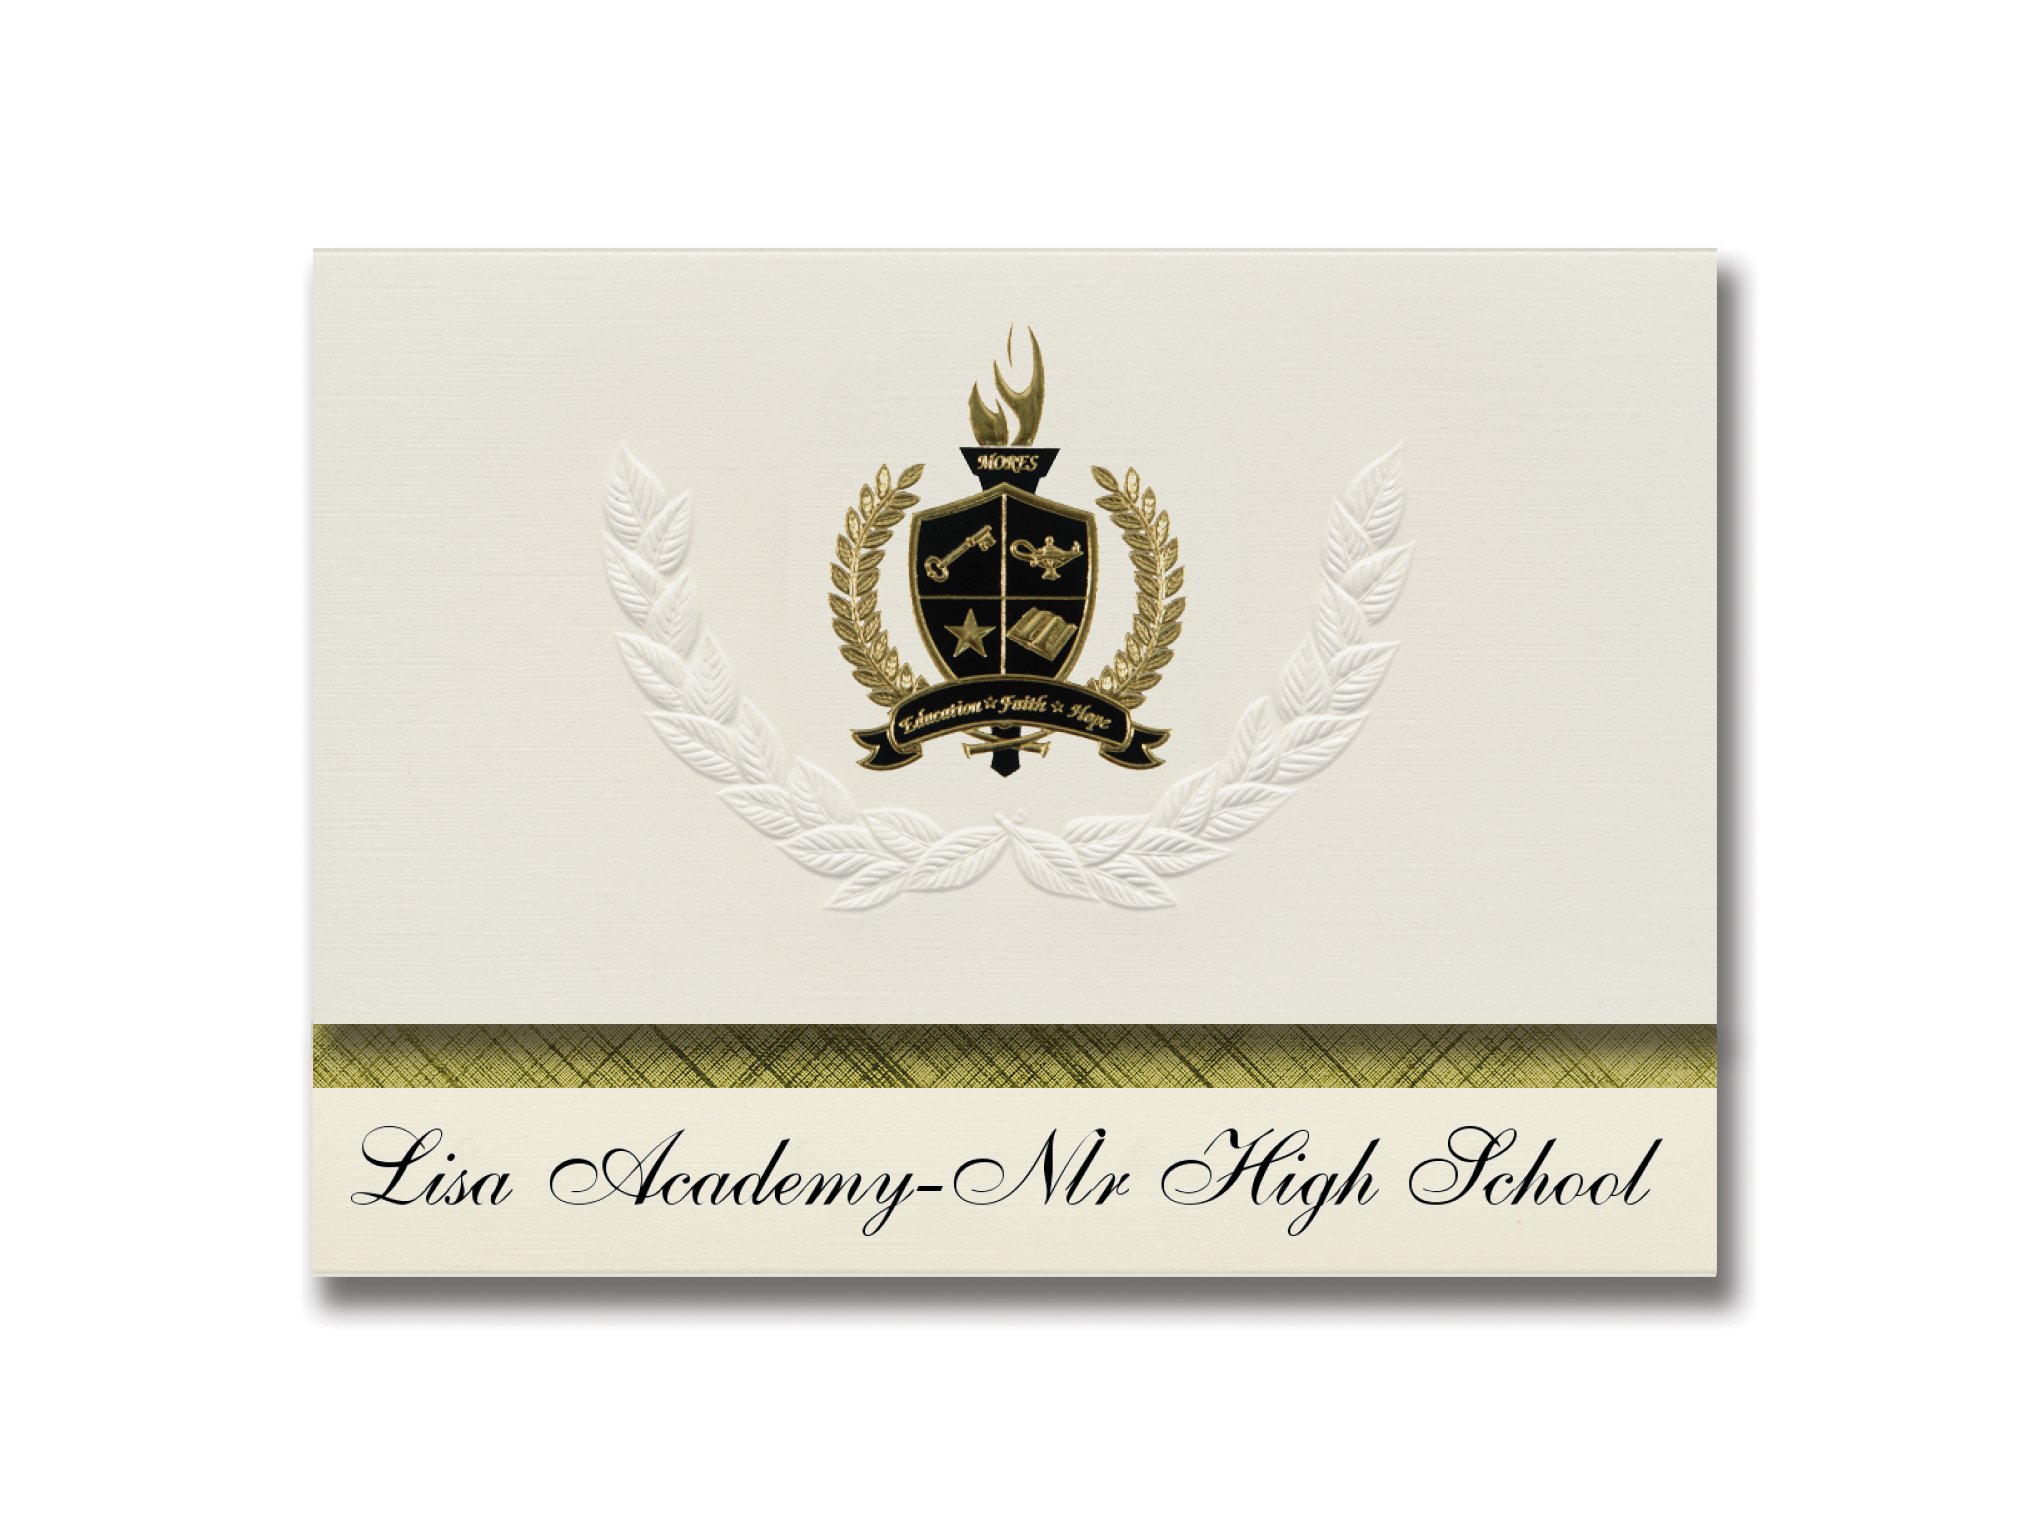 Signature Announcements Lisa Academy-Nlr High School (Sherwood, AR) Graduation Announcements, Presidential style, Elite package of 25 with Gold & B...